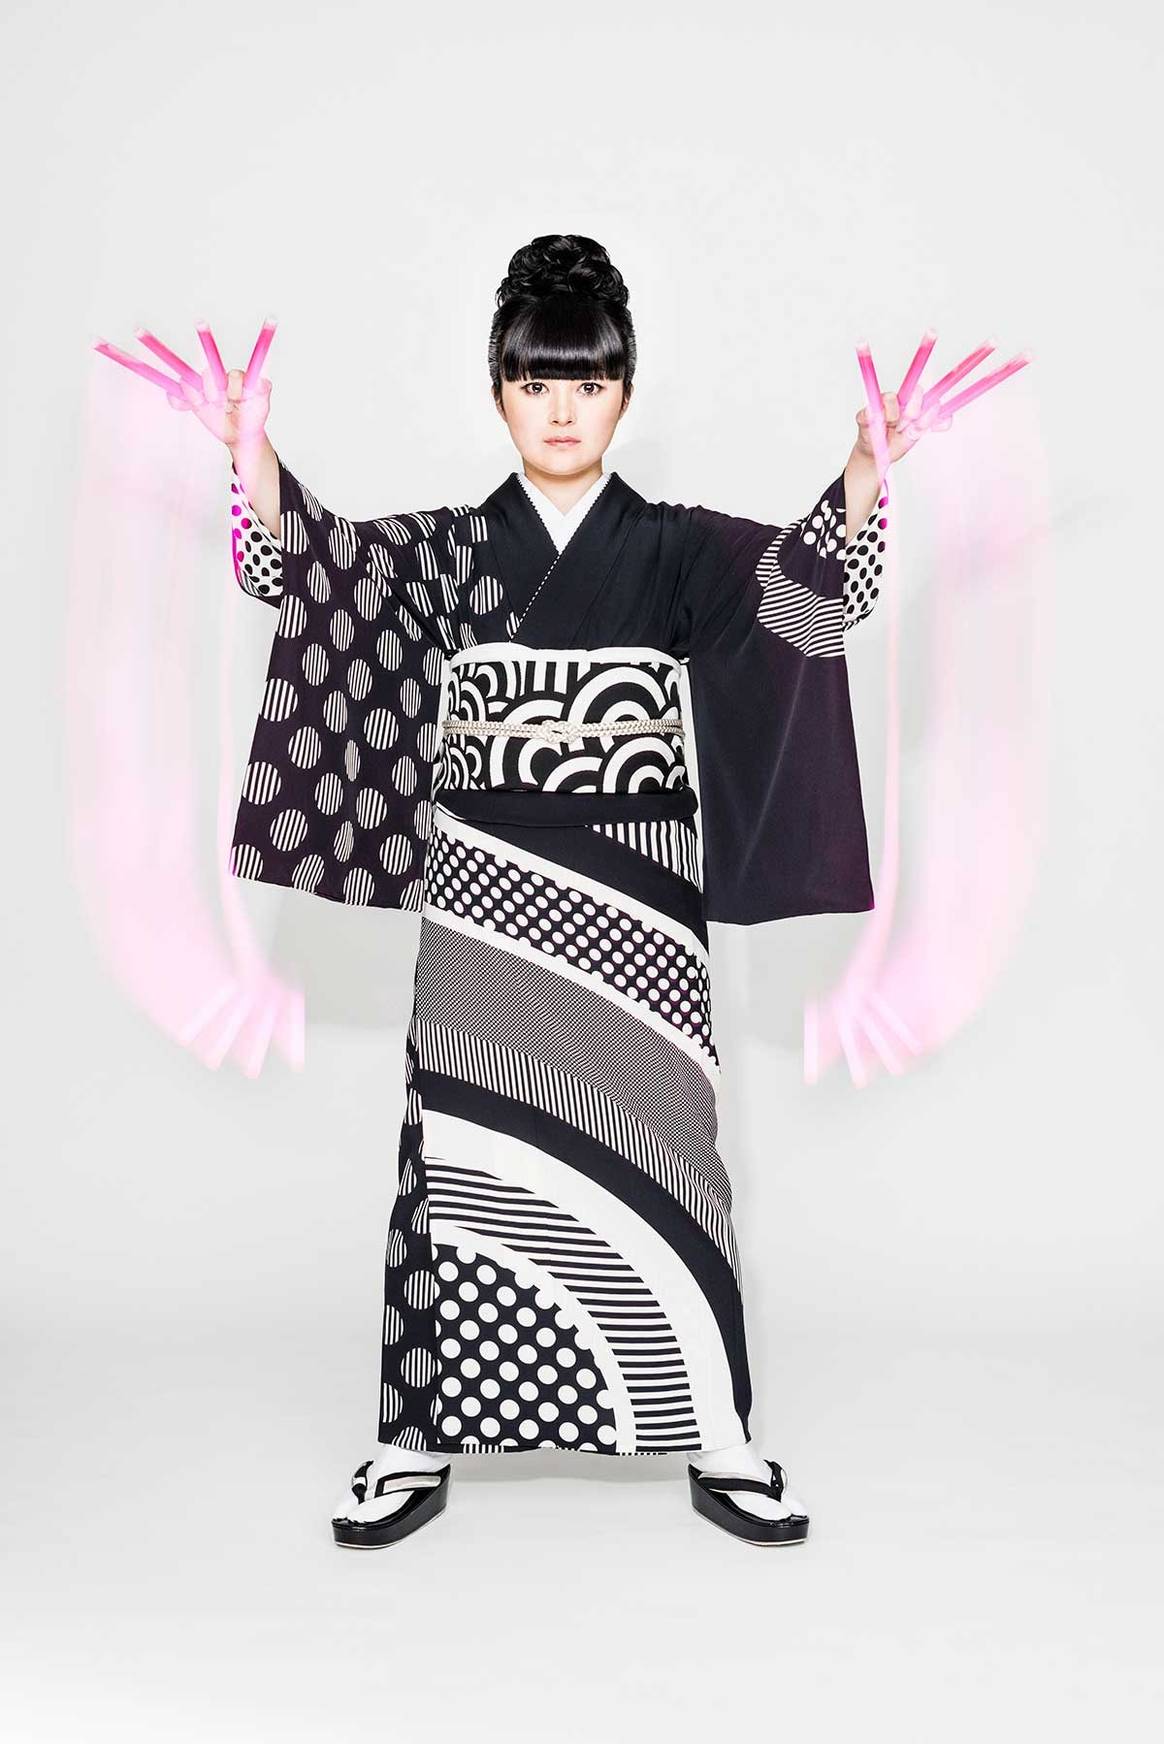 V&A to stage Europe’s first major exhibition on the kimono